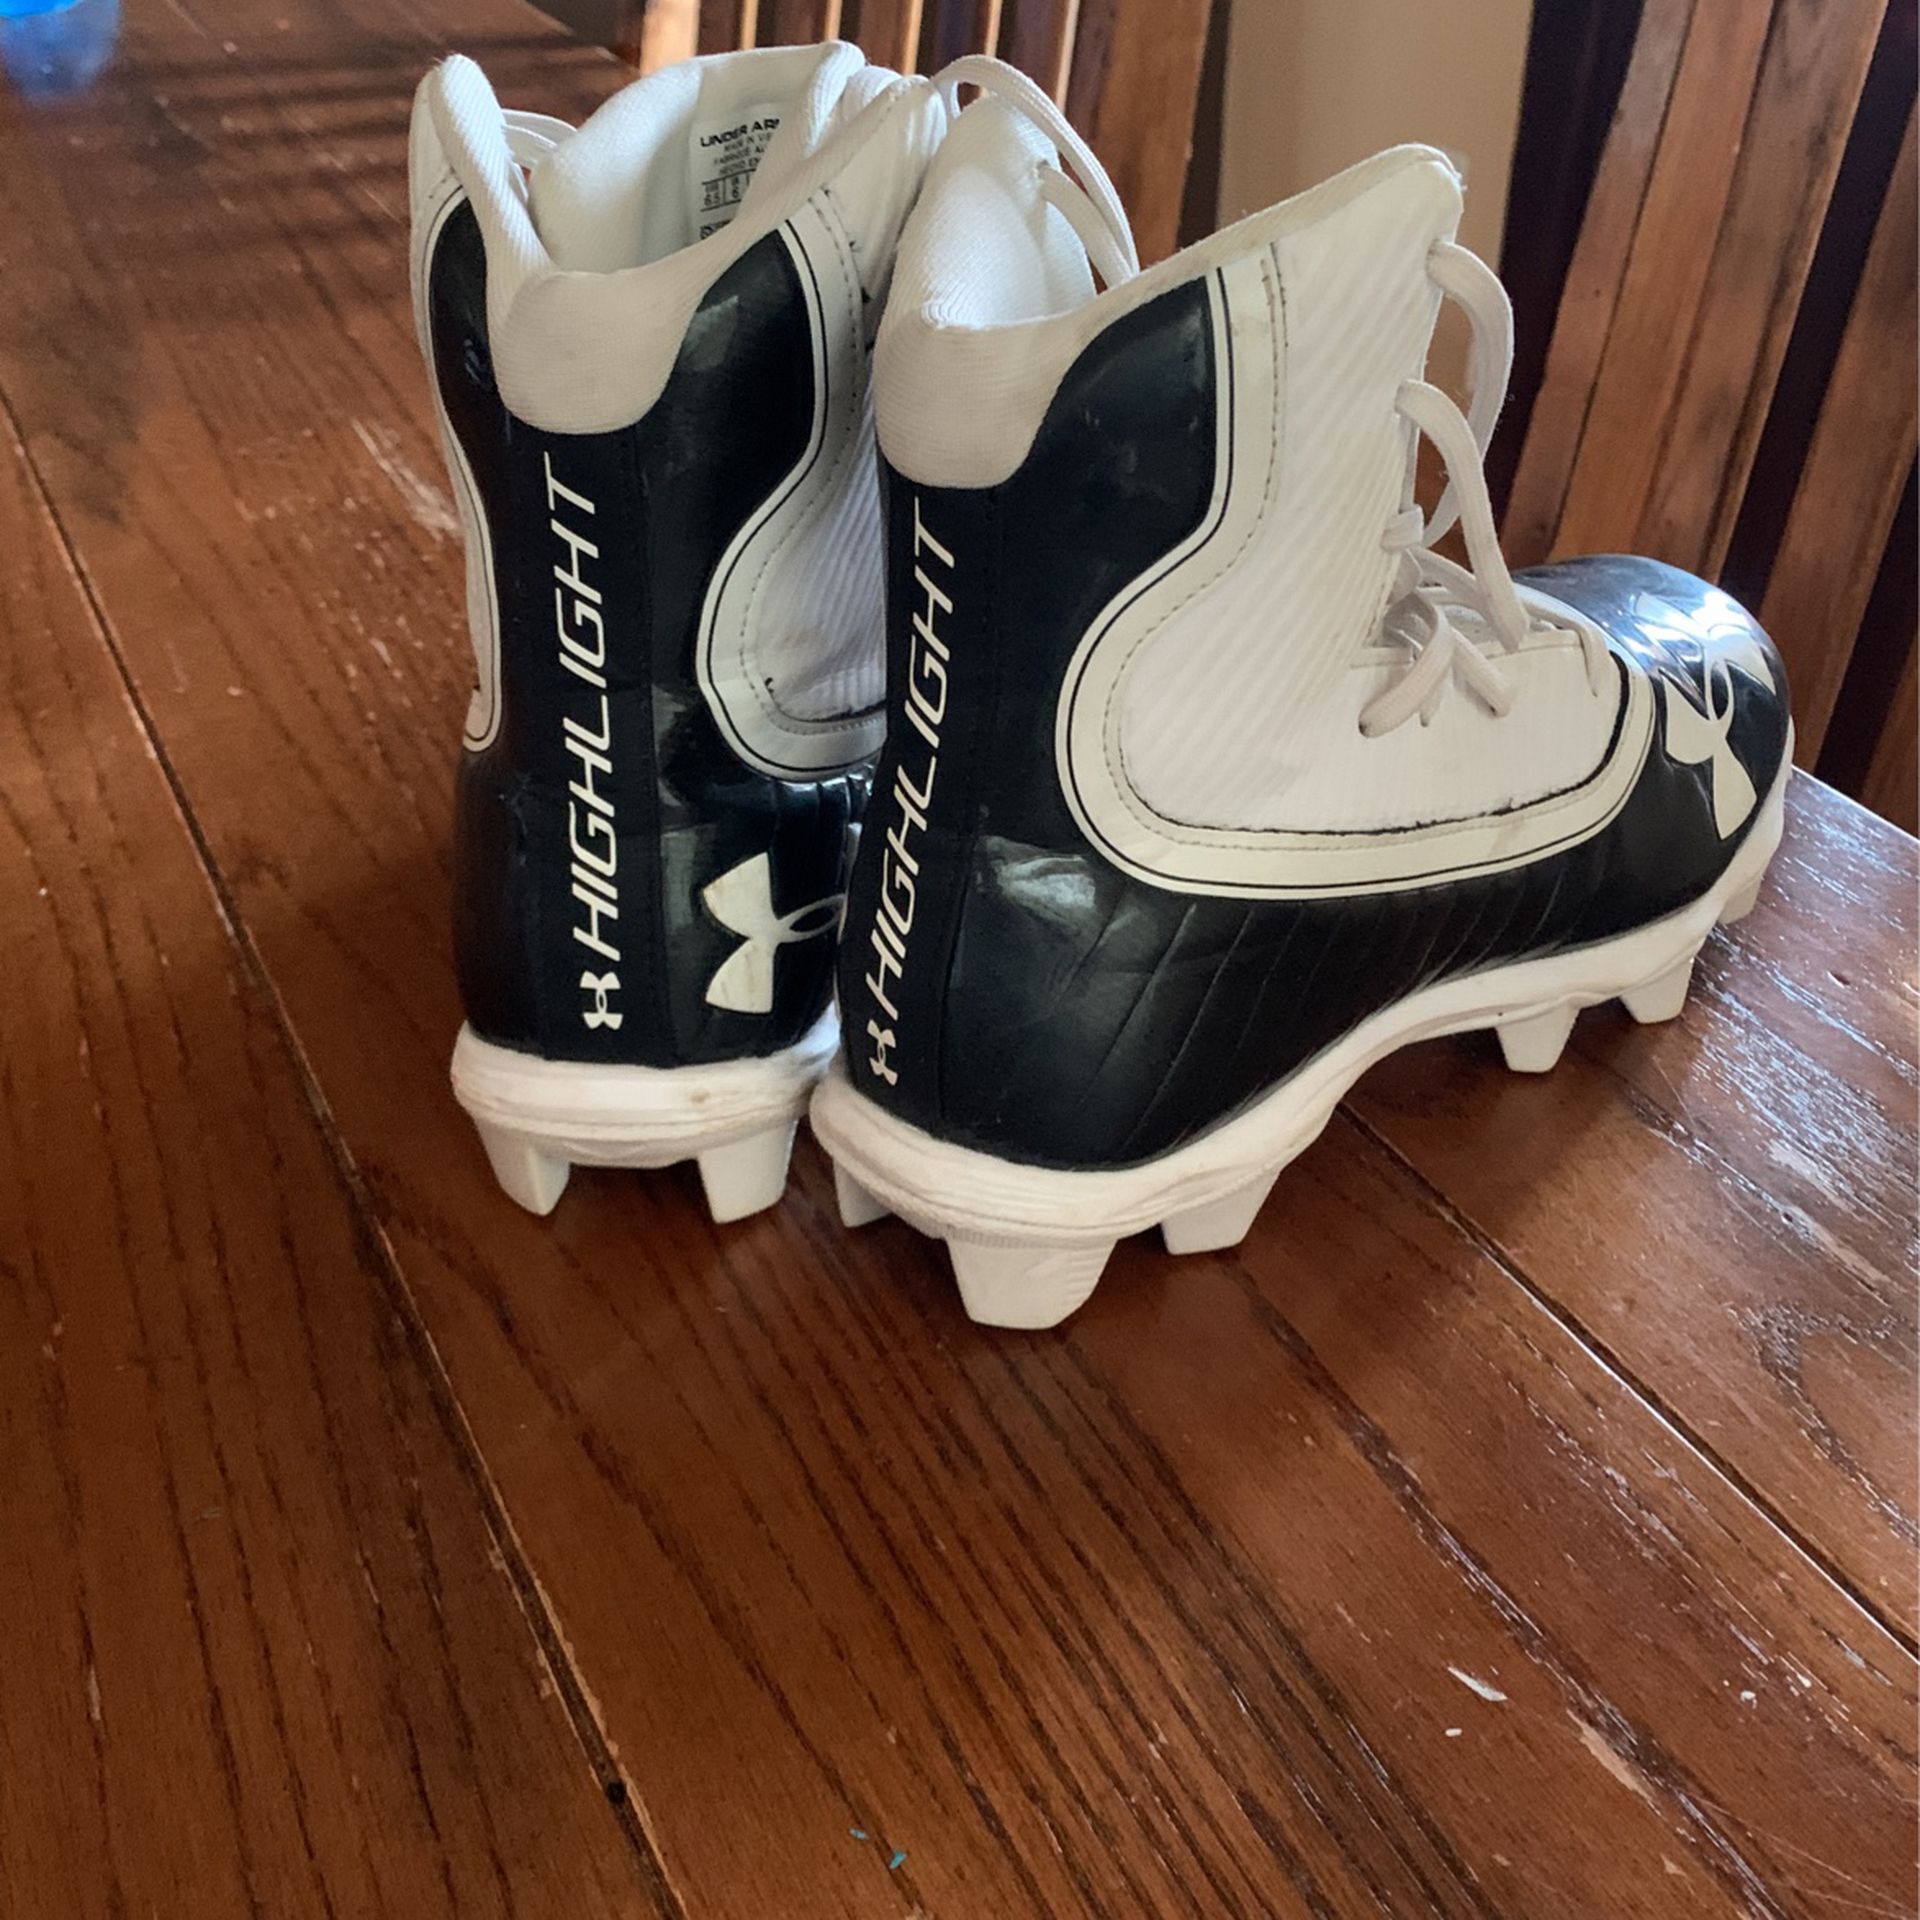 Under Armor Football Cleats Size 6.5